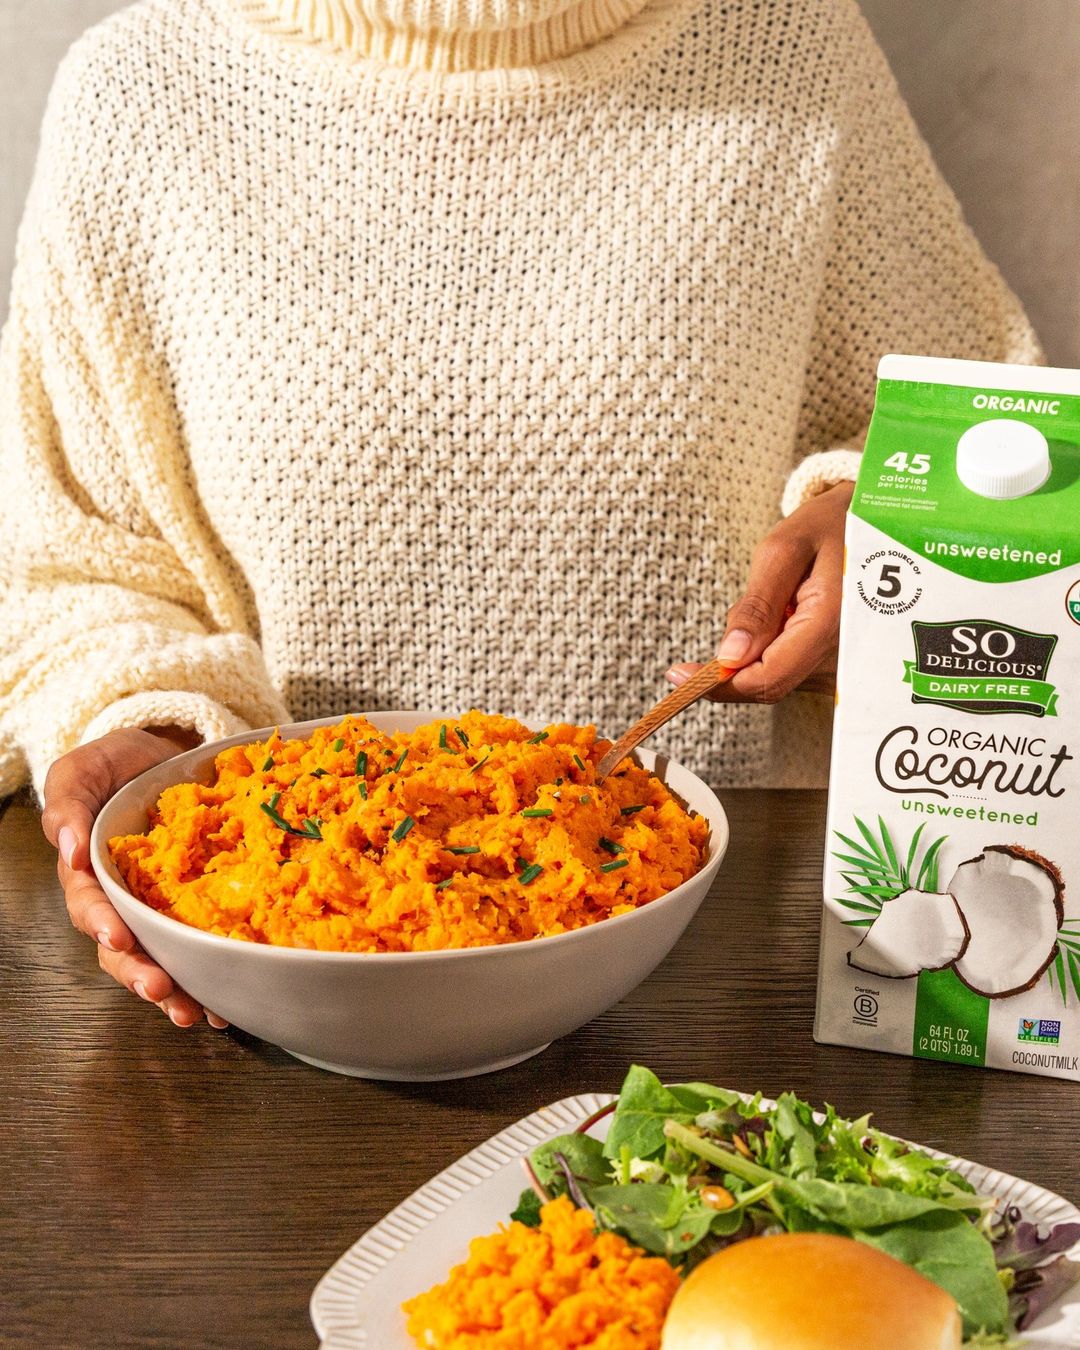 VegNews.costcoveganproducts.SoDelicious